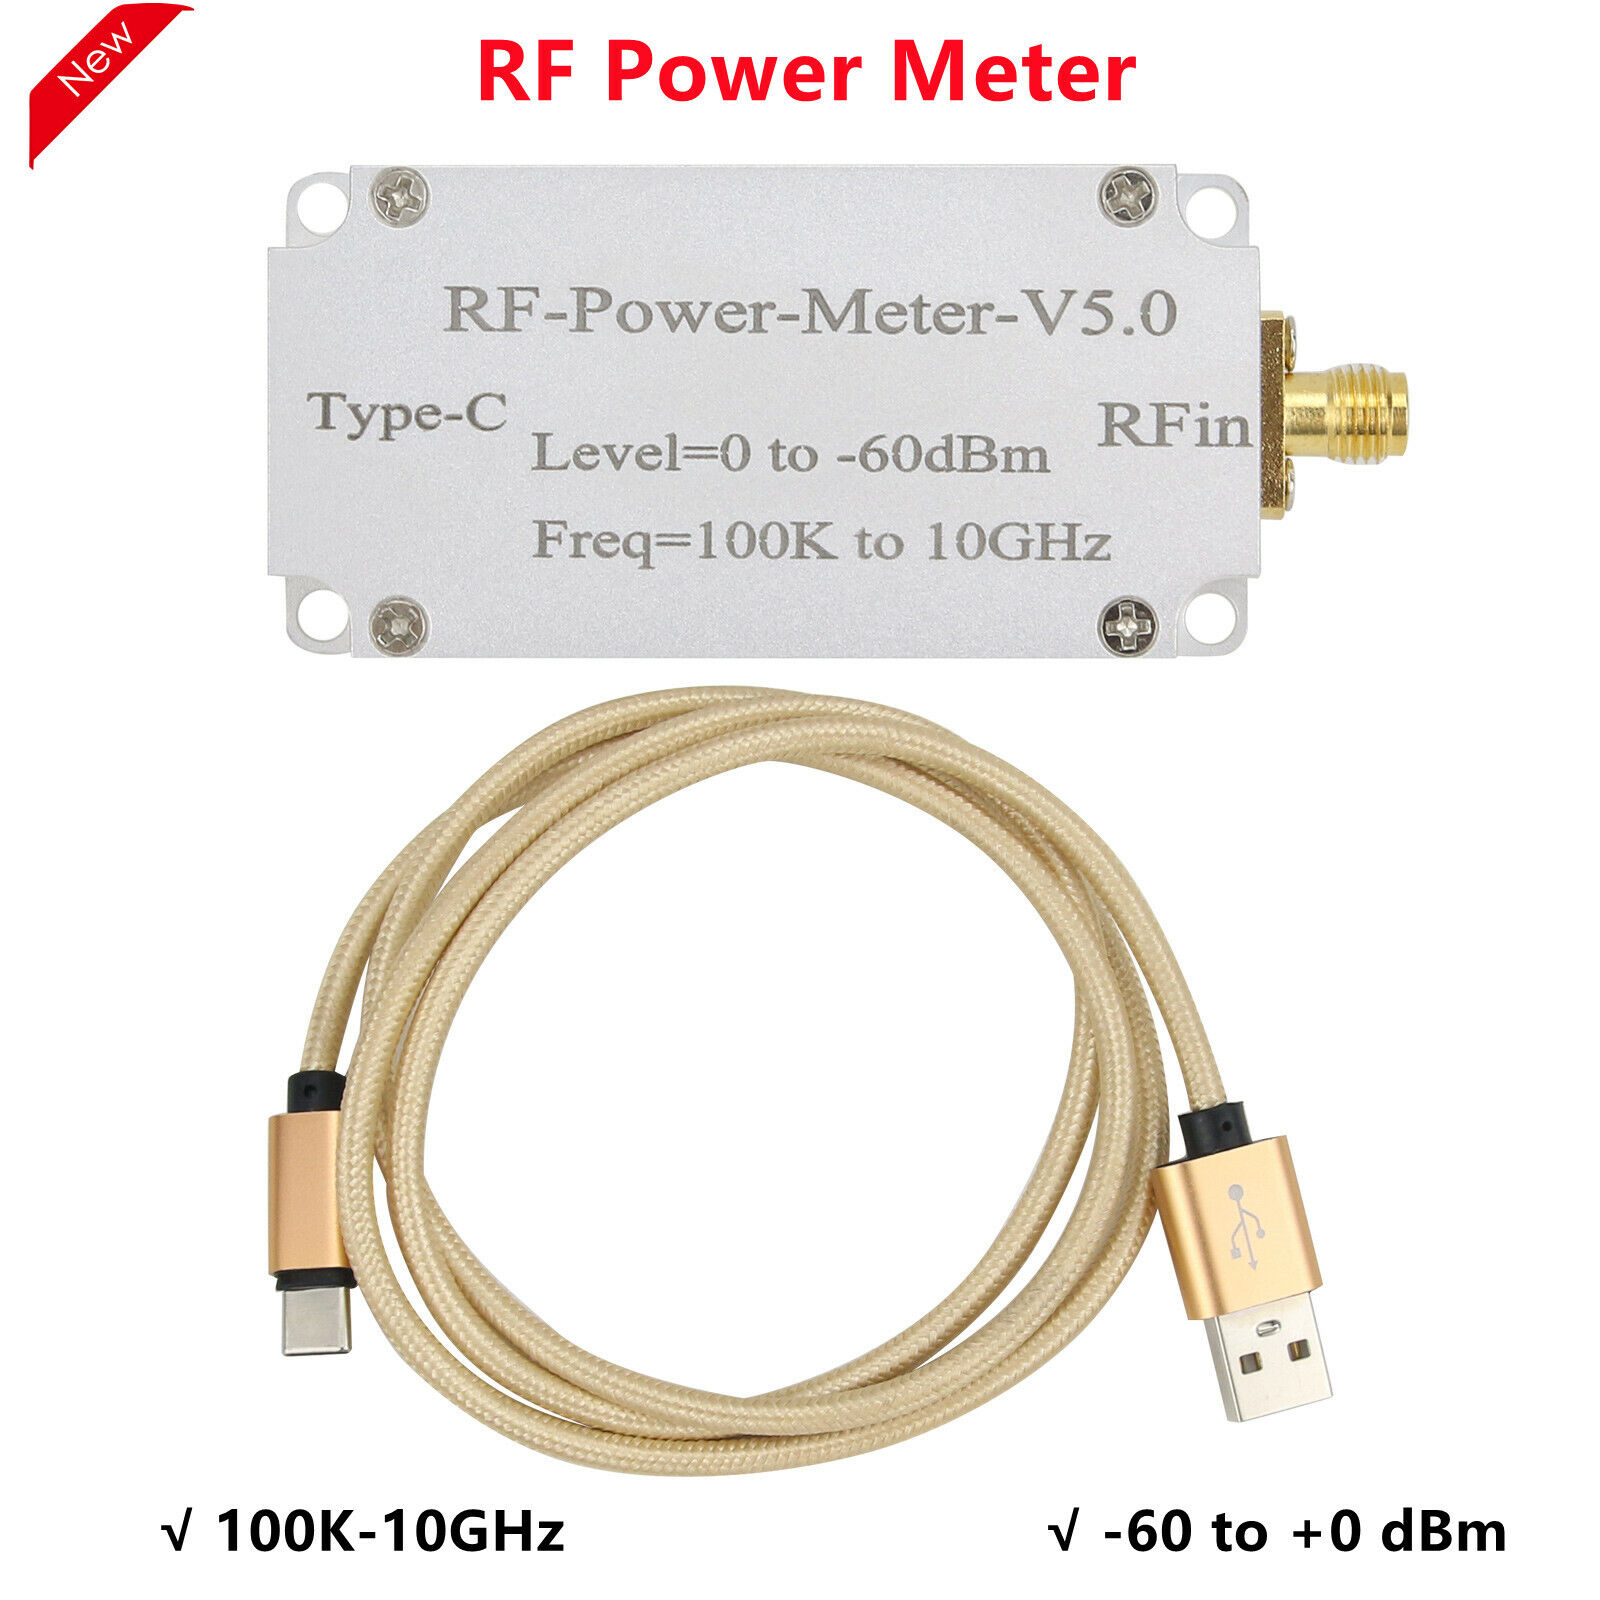 RF-Power-Meter-V5.0 100K-10GHz RF Power Meter Acquisition Type With Type-C Port